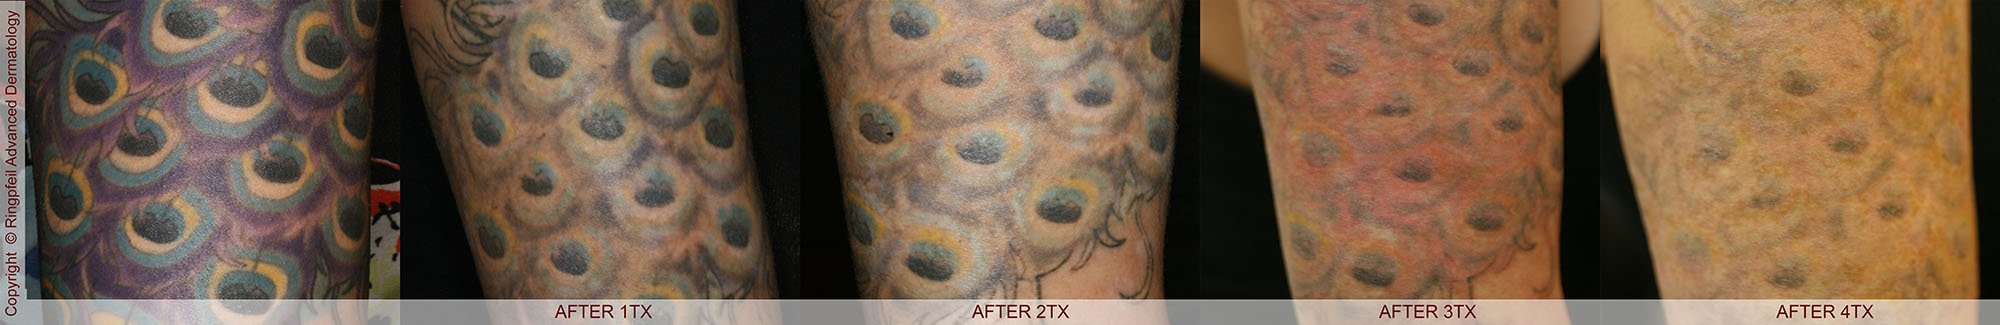 Before and After 4 Treatment -Picosure Vs. QSwitch in Philadelphia - tattoo removal, patient hand